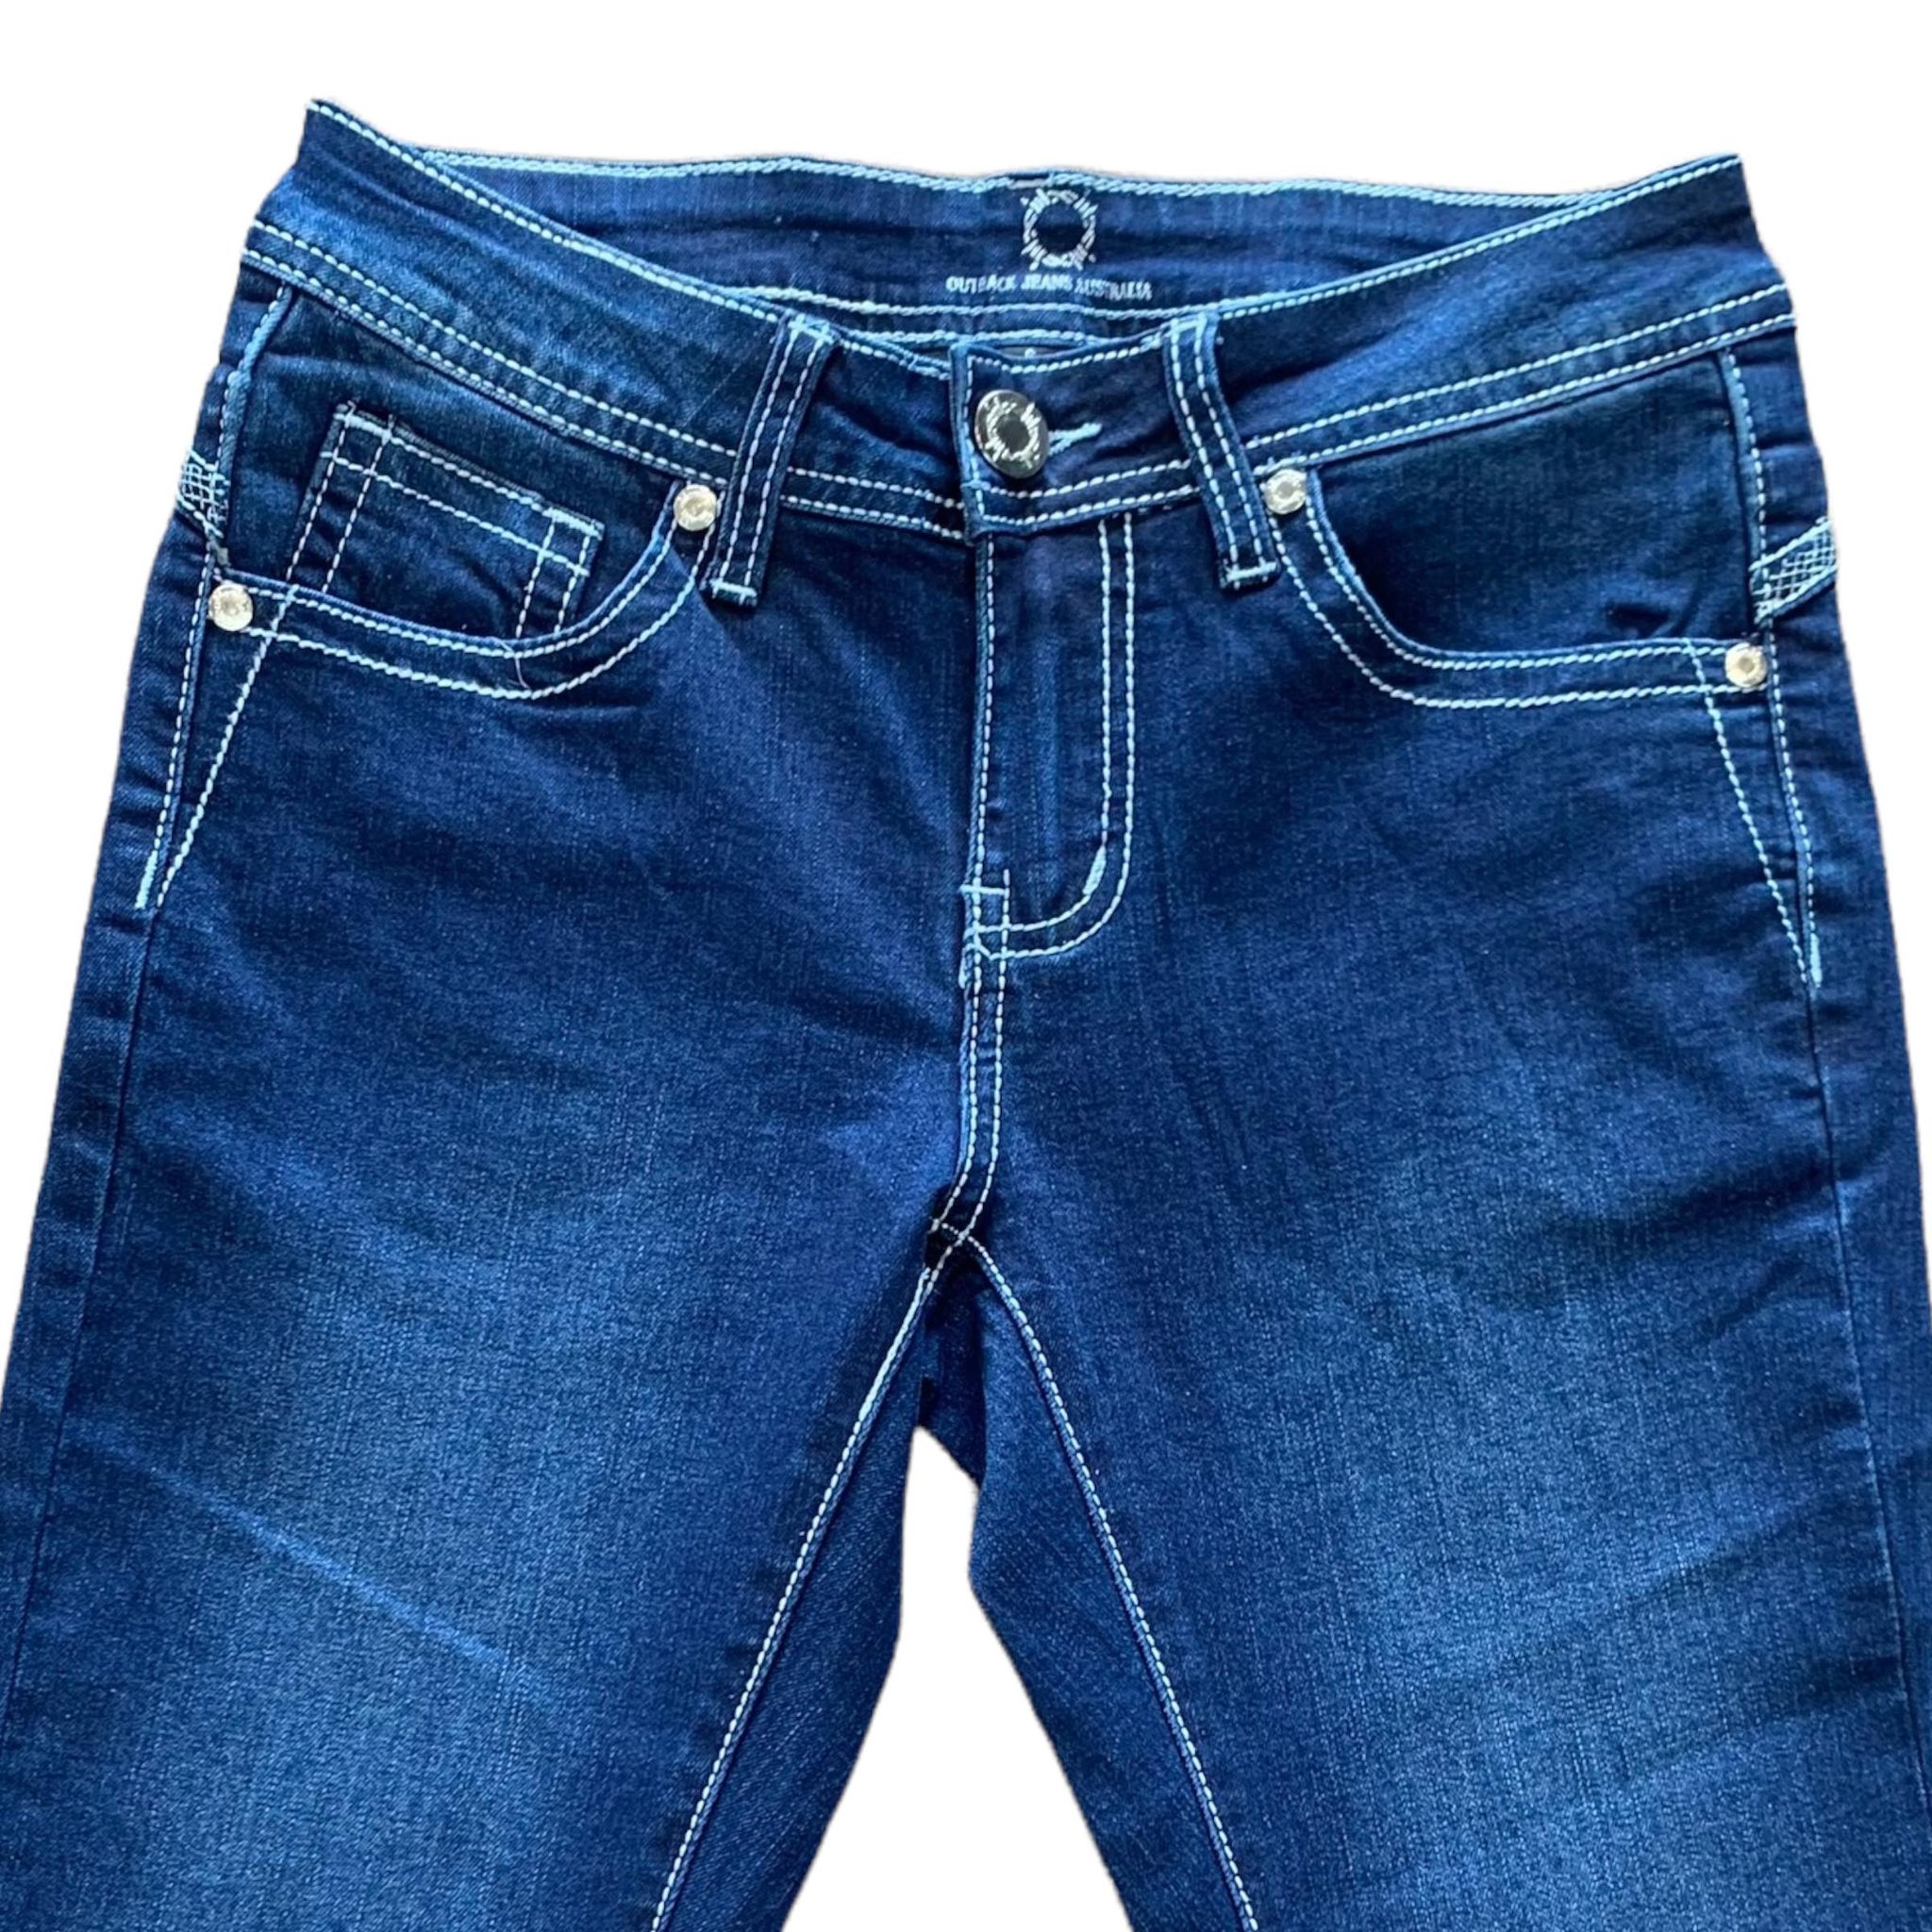 'Englewood' Wild Child Bootcut Jeans